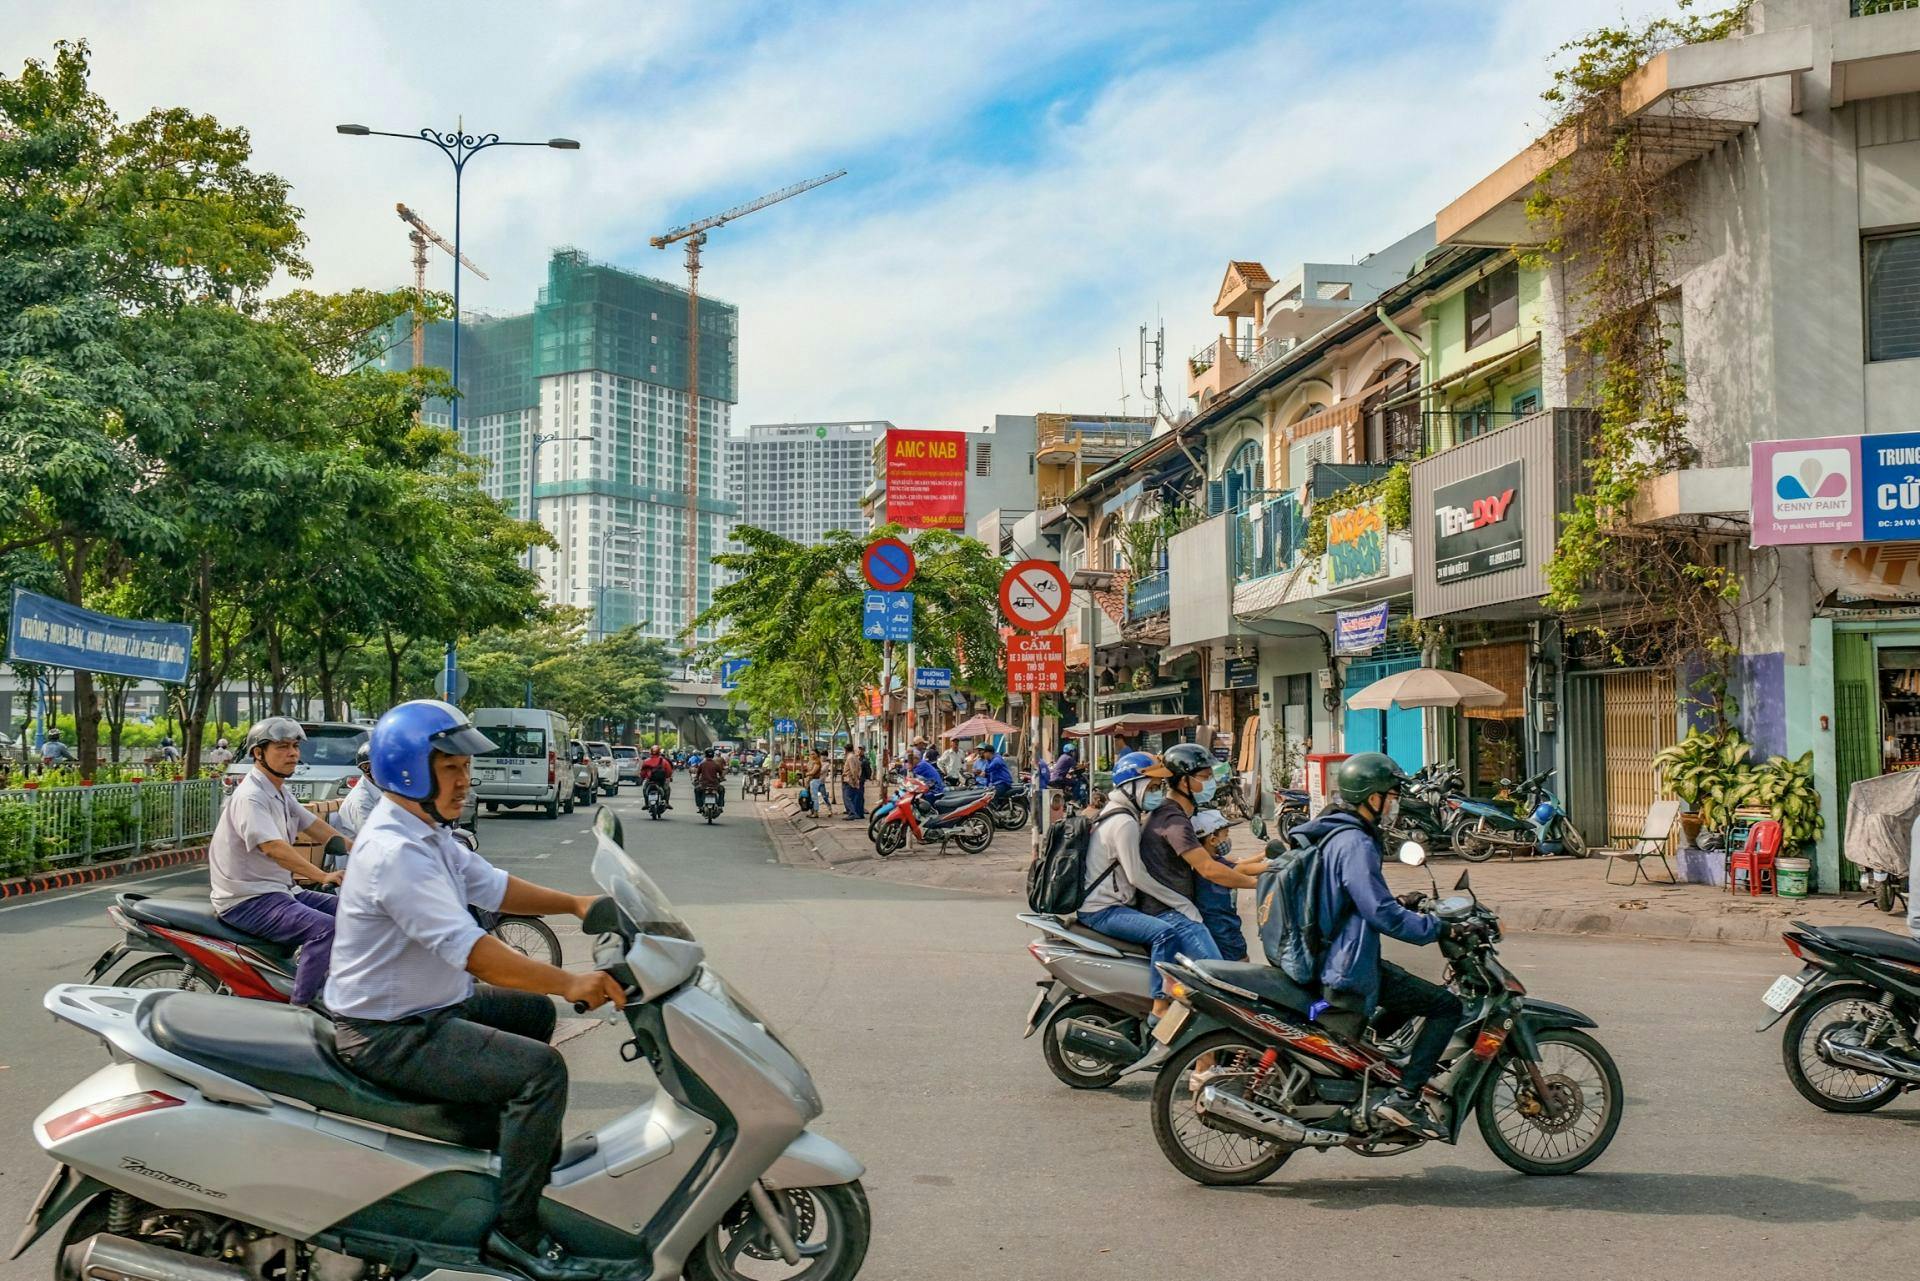 Image - Top 10 Things to Do in Saigon (Ho Chi Minh City)